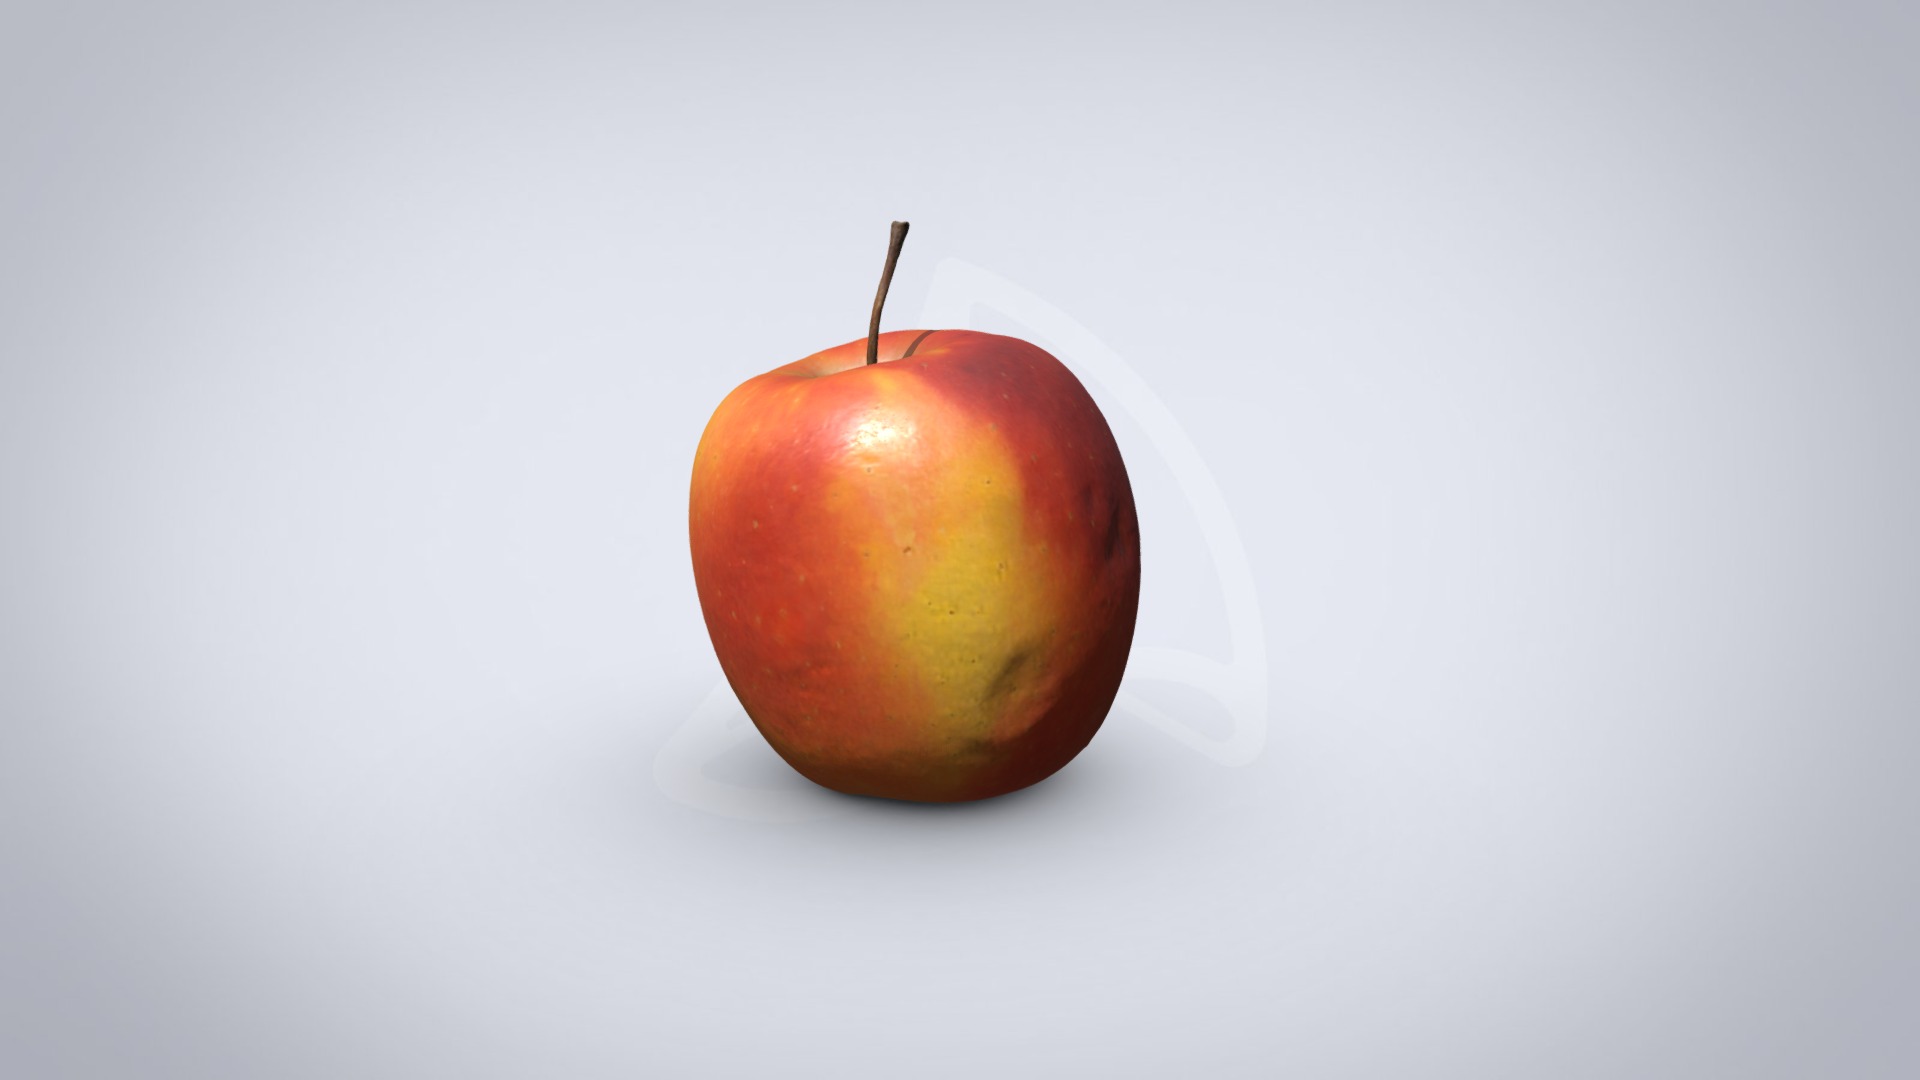 3D model Fuji red apple - This is a 3D model of the Fuji red apple. The 3D model is about a red apple on a white surface.